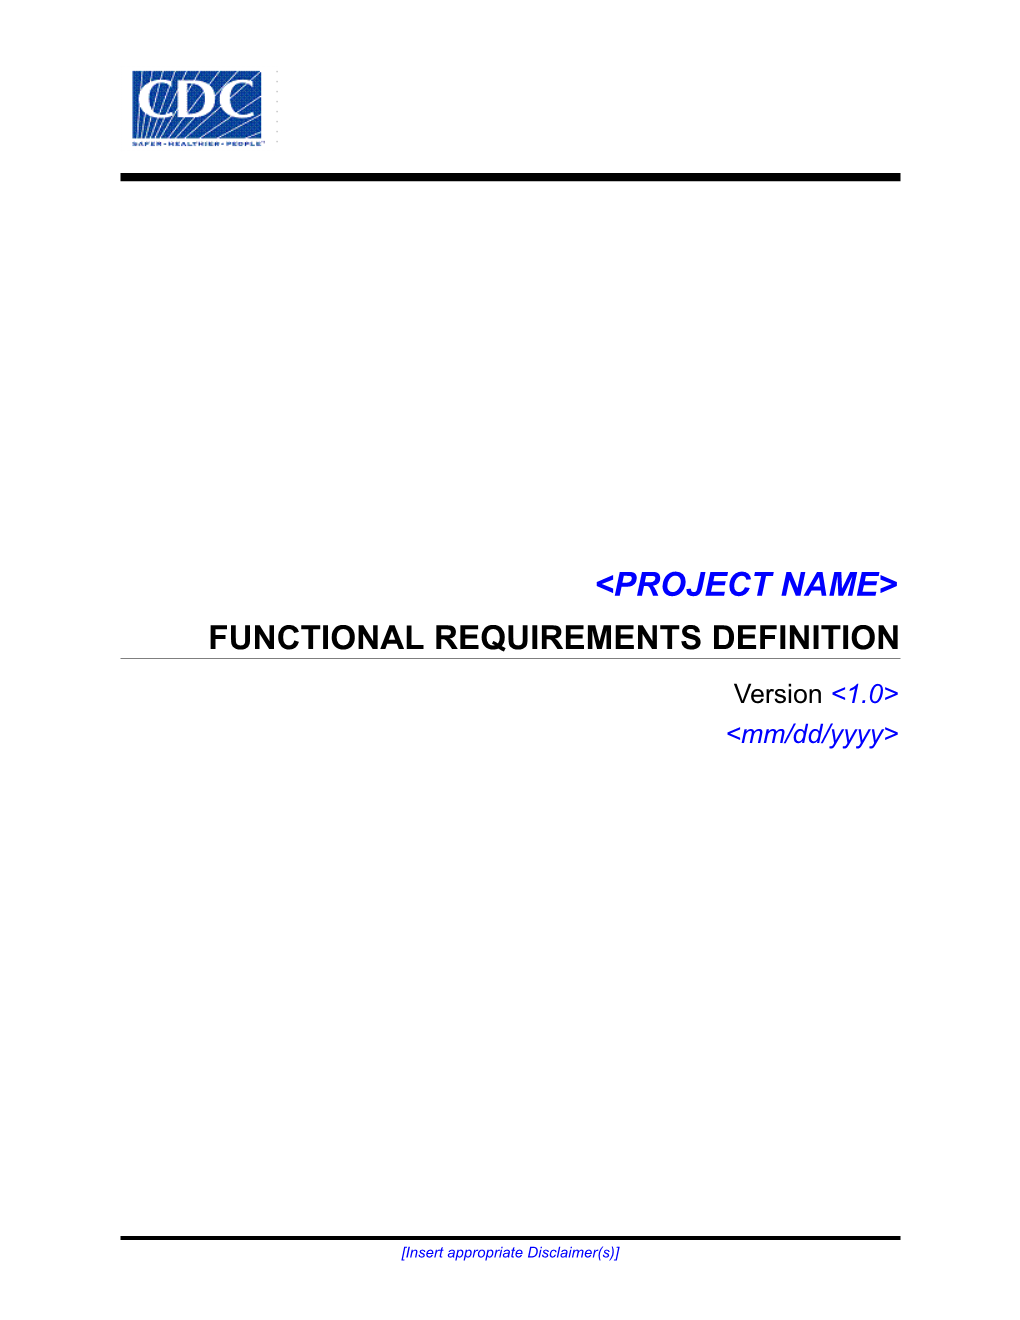 Functional Requirements Definition